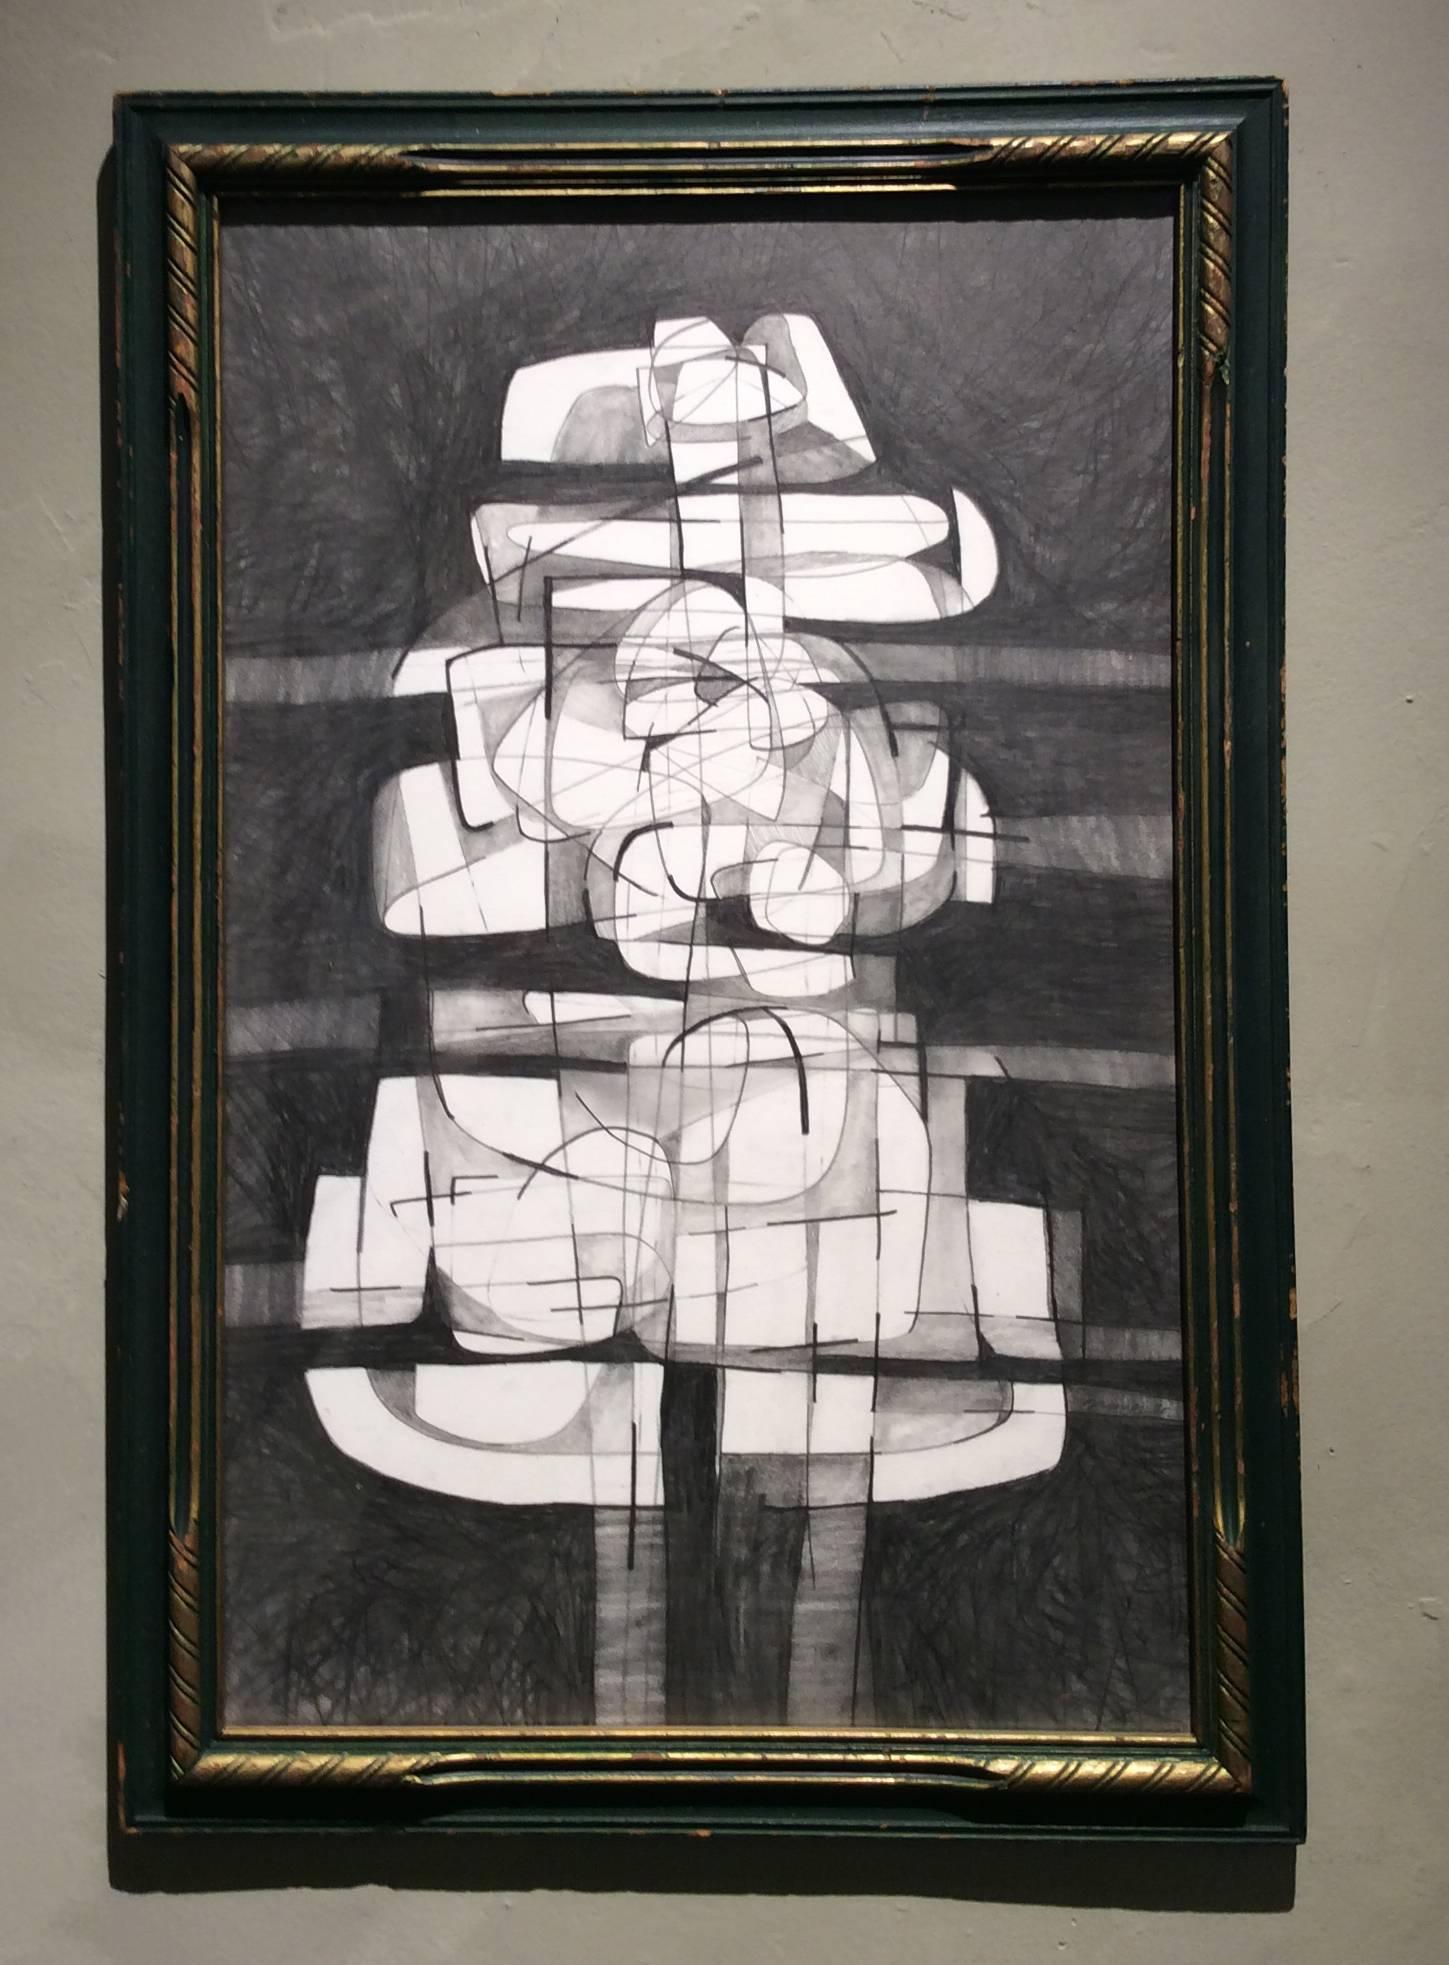 Infanta XXII: Abstract Cubist Style Graphite Drawing in Mid Century Modern Frame - Art by David Dew Bruner